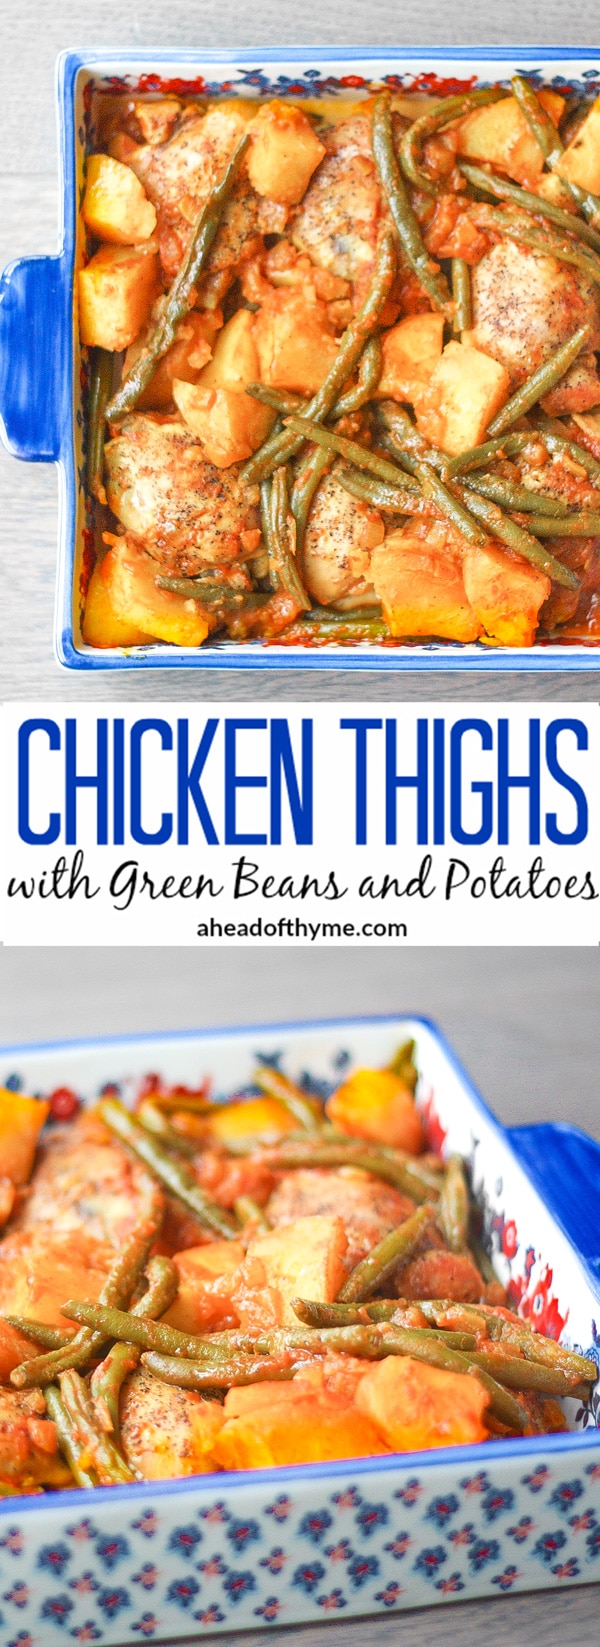 Chicken Thighs with Potatoes and Green Beans in Tomato Sauce: Budget-friendly chicekn thighs make for a delcious dinner packed with flavour in this Middle Eastern inspired dish | aheadofthyme.com